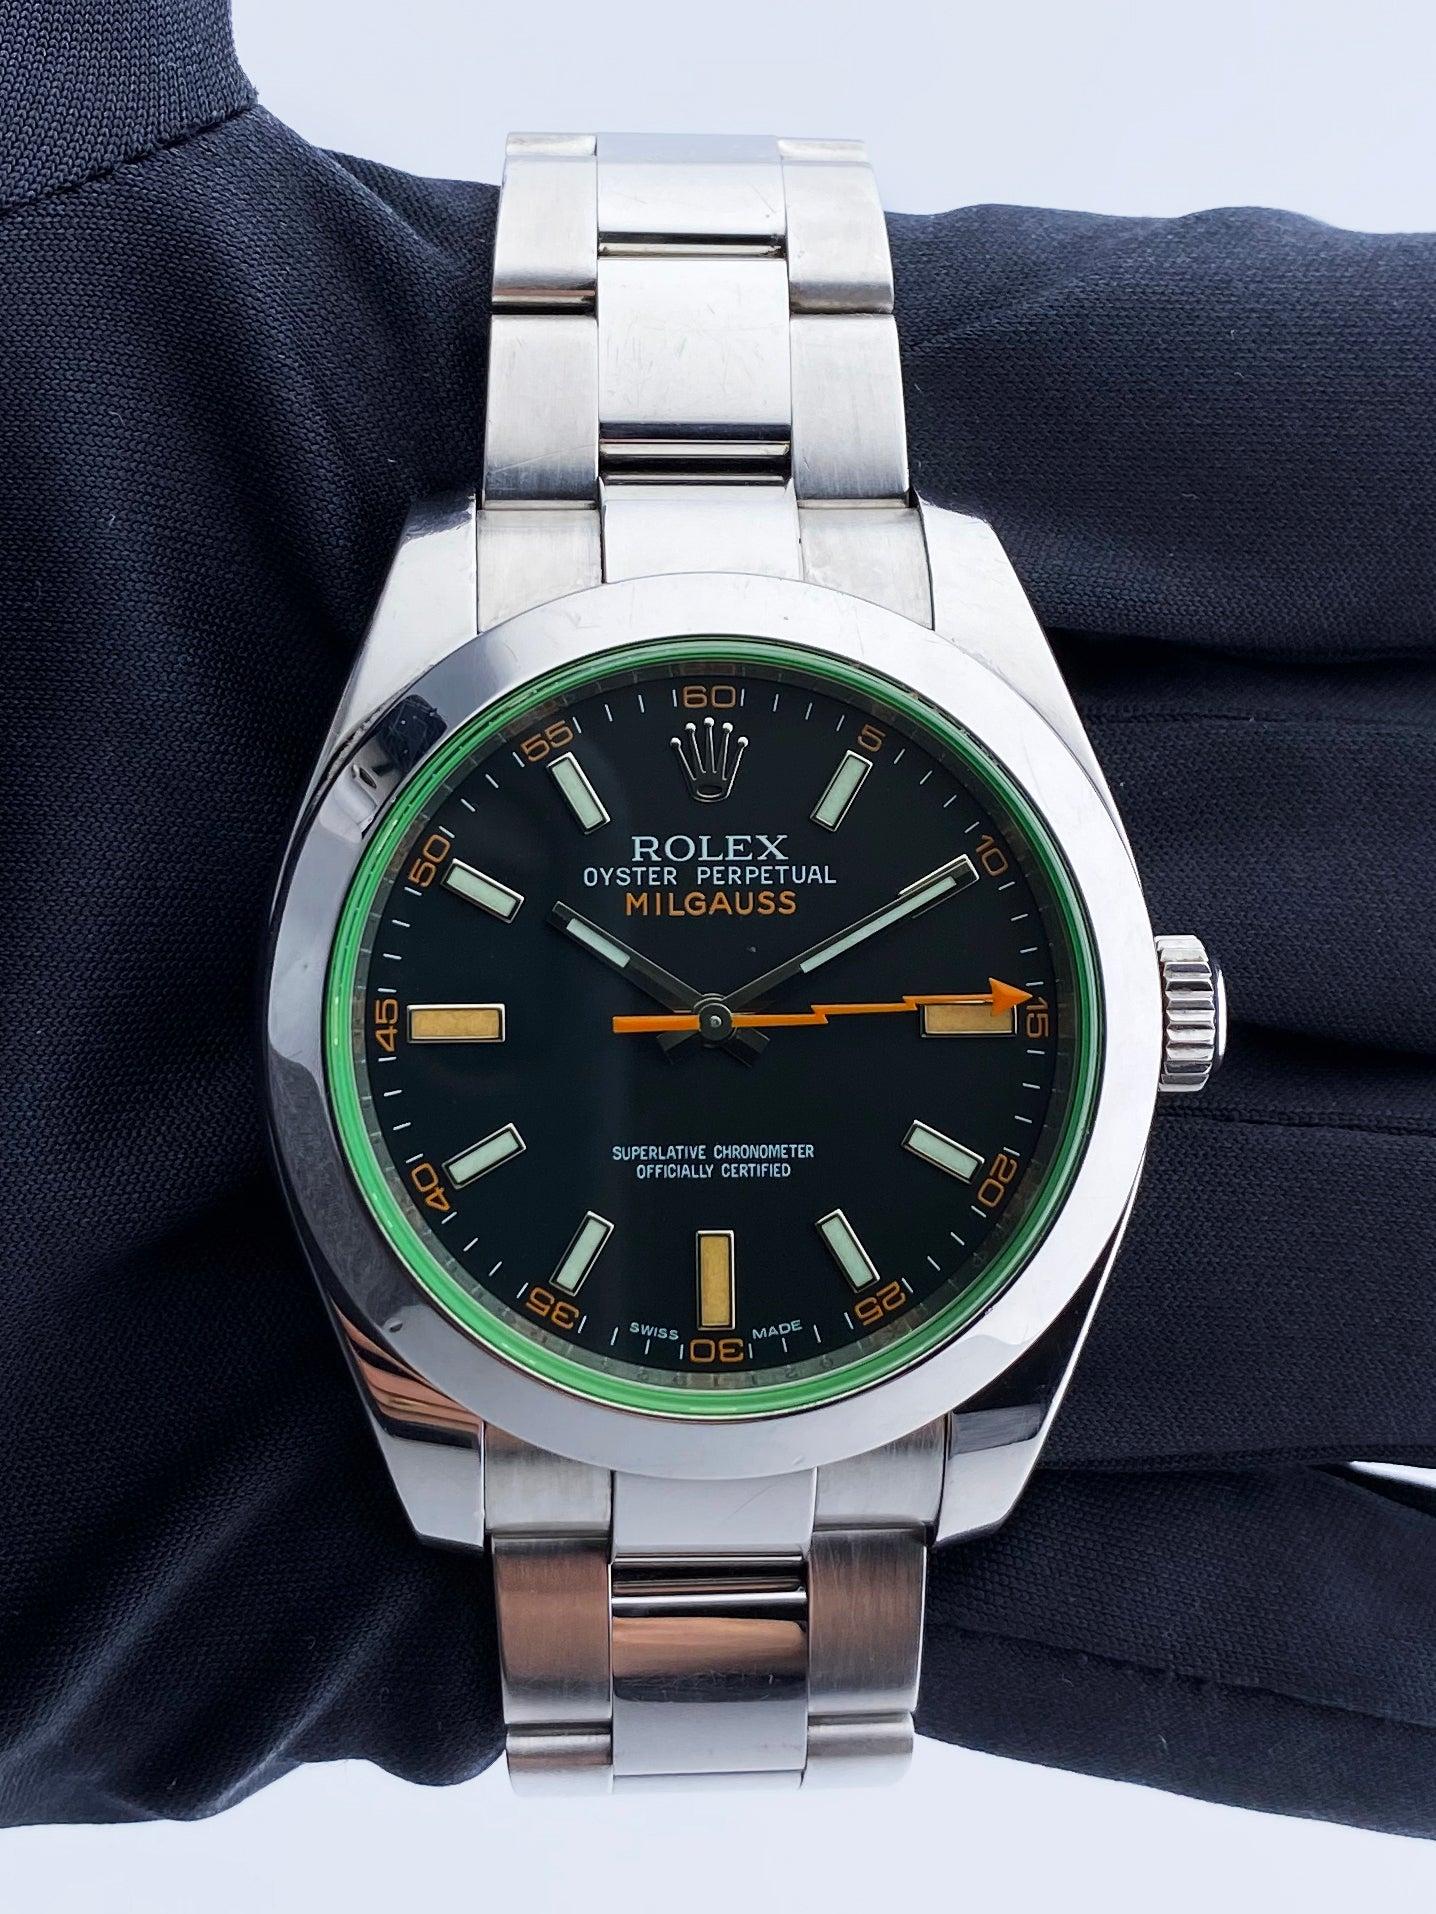 Rolex Milgauss 116400GV Mens Watch. 40mm stainless steel case and smooth bezel. Black dial with luminous silver-tone hands and index hour markers. Minute markers around the outer dial. Stainless steel Oyster Bracelet with fold over clasp. Will fit